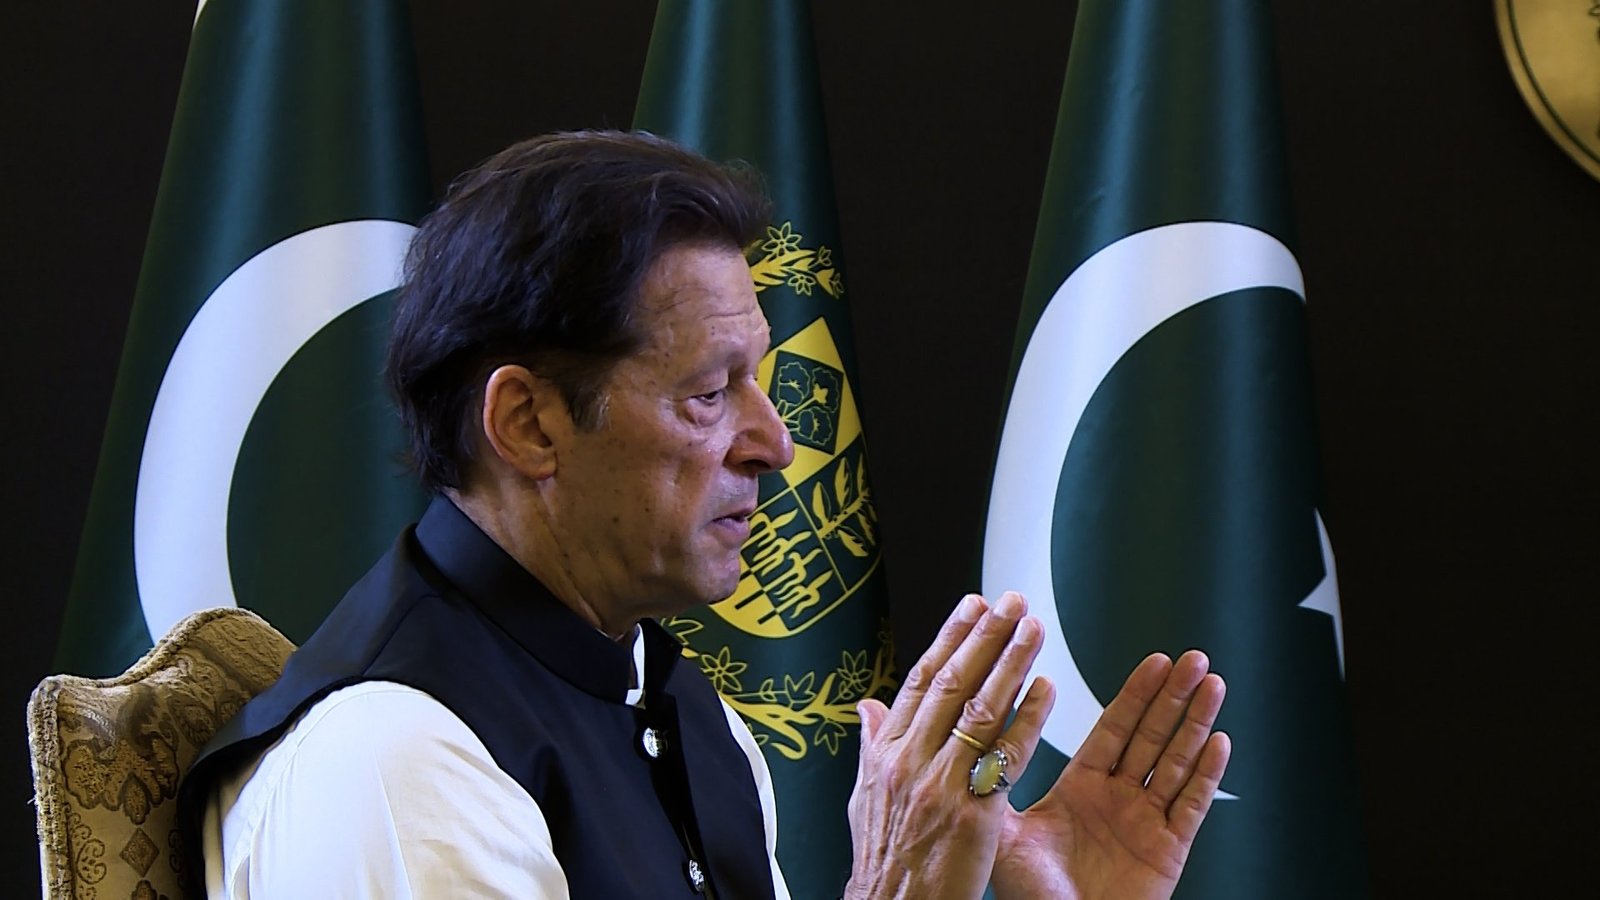 Imran Khan: India drawing inspiration from ‘Israel’ in Kashmir